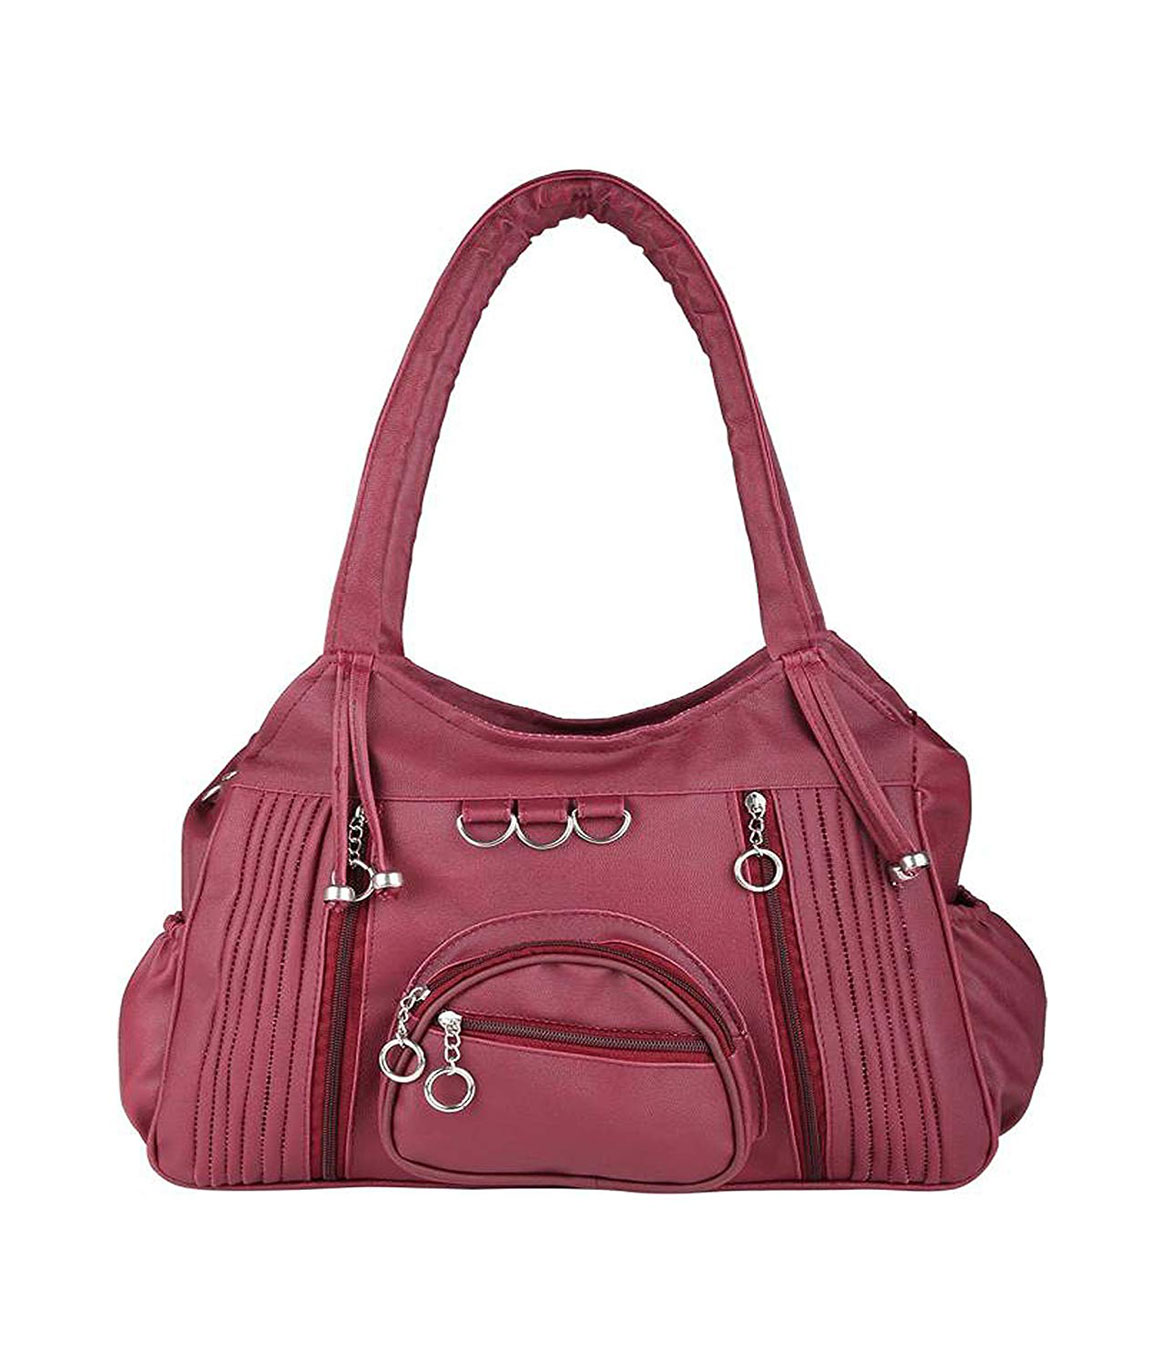 Youngi Express: The Latest Fashion Handbags for Women, Made with PU Le